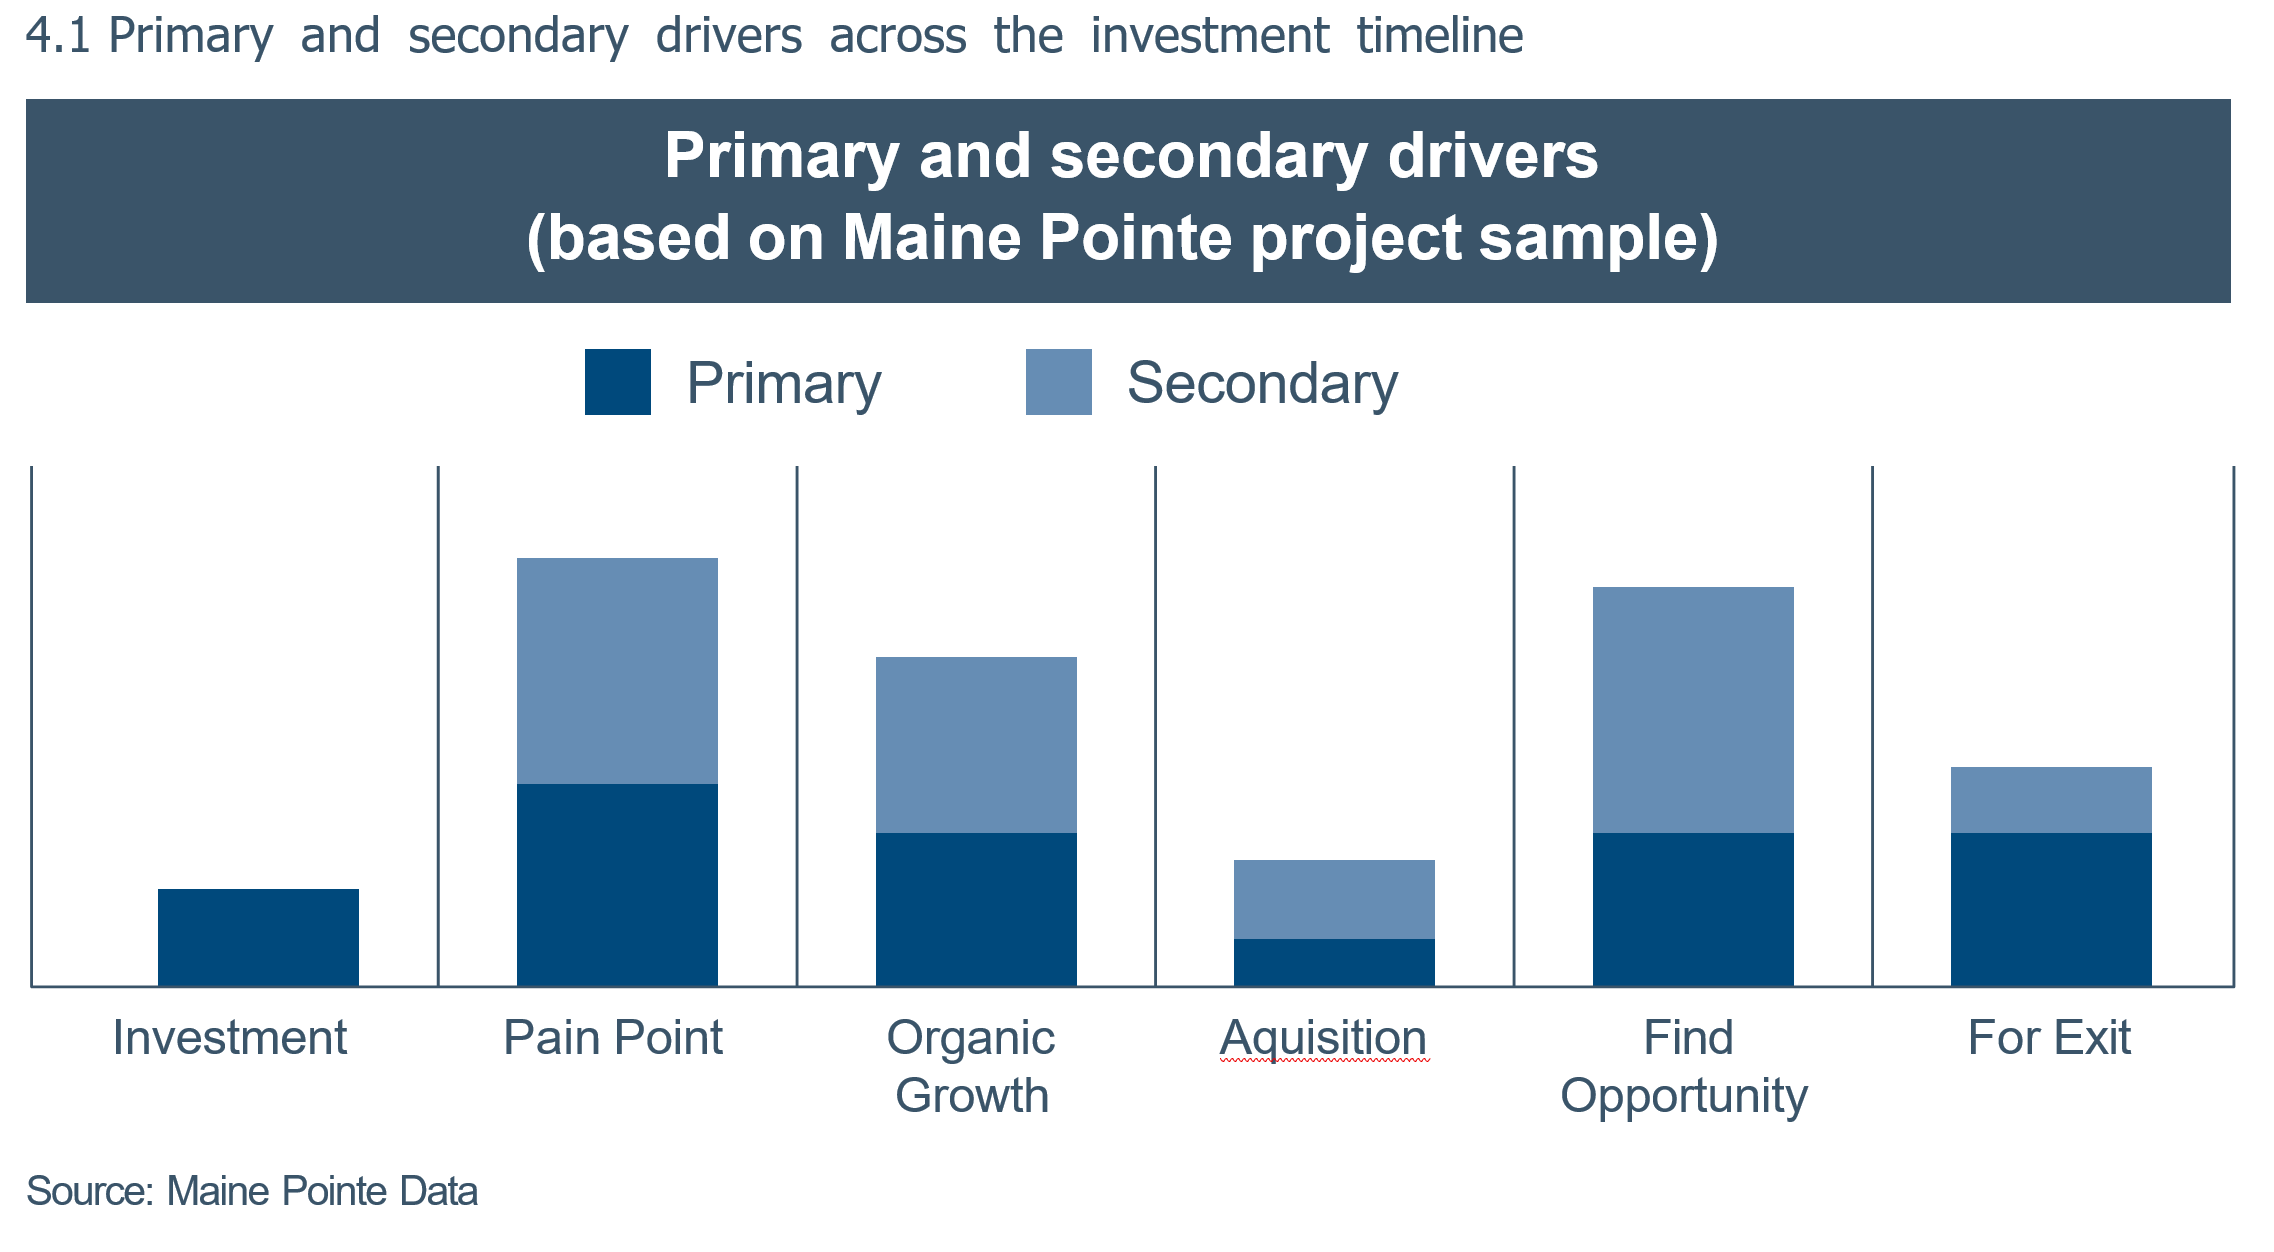 4.1	Primary and secondary drivers across the investment timeline